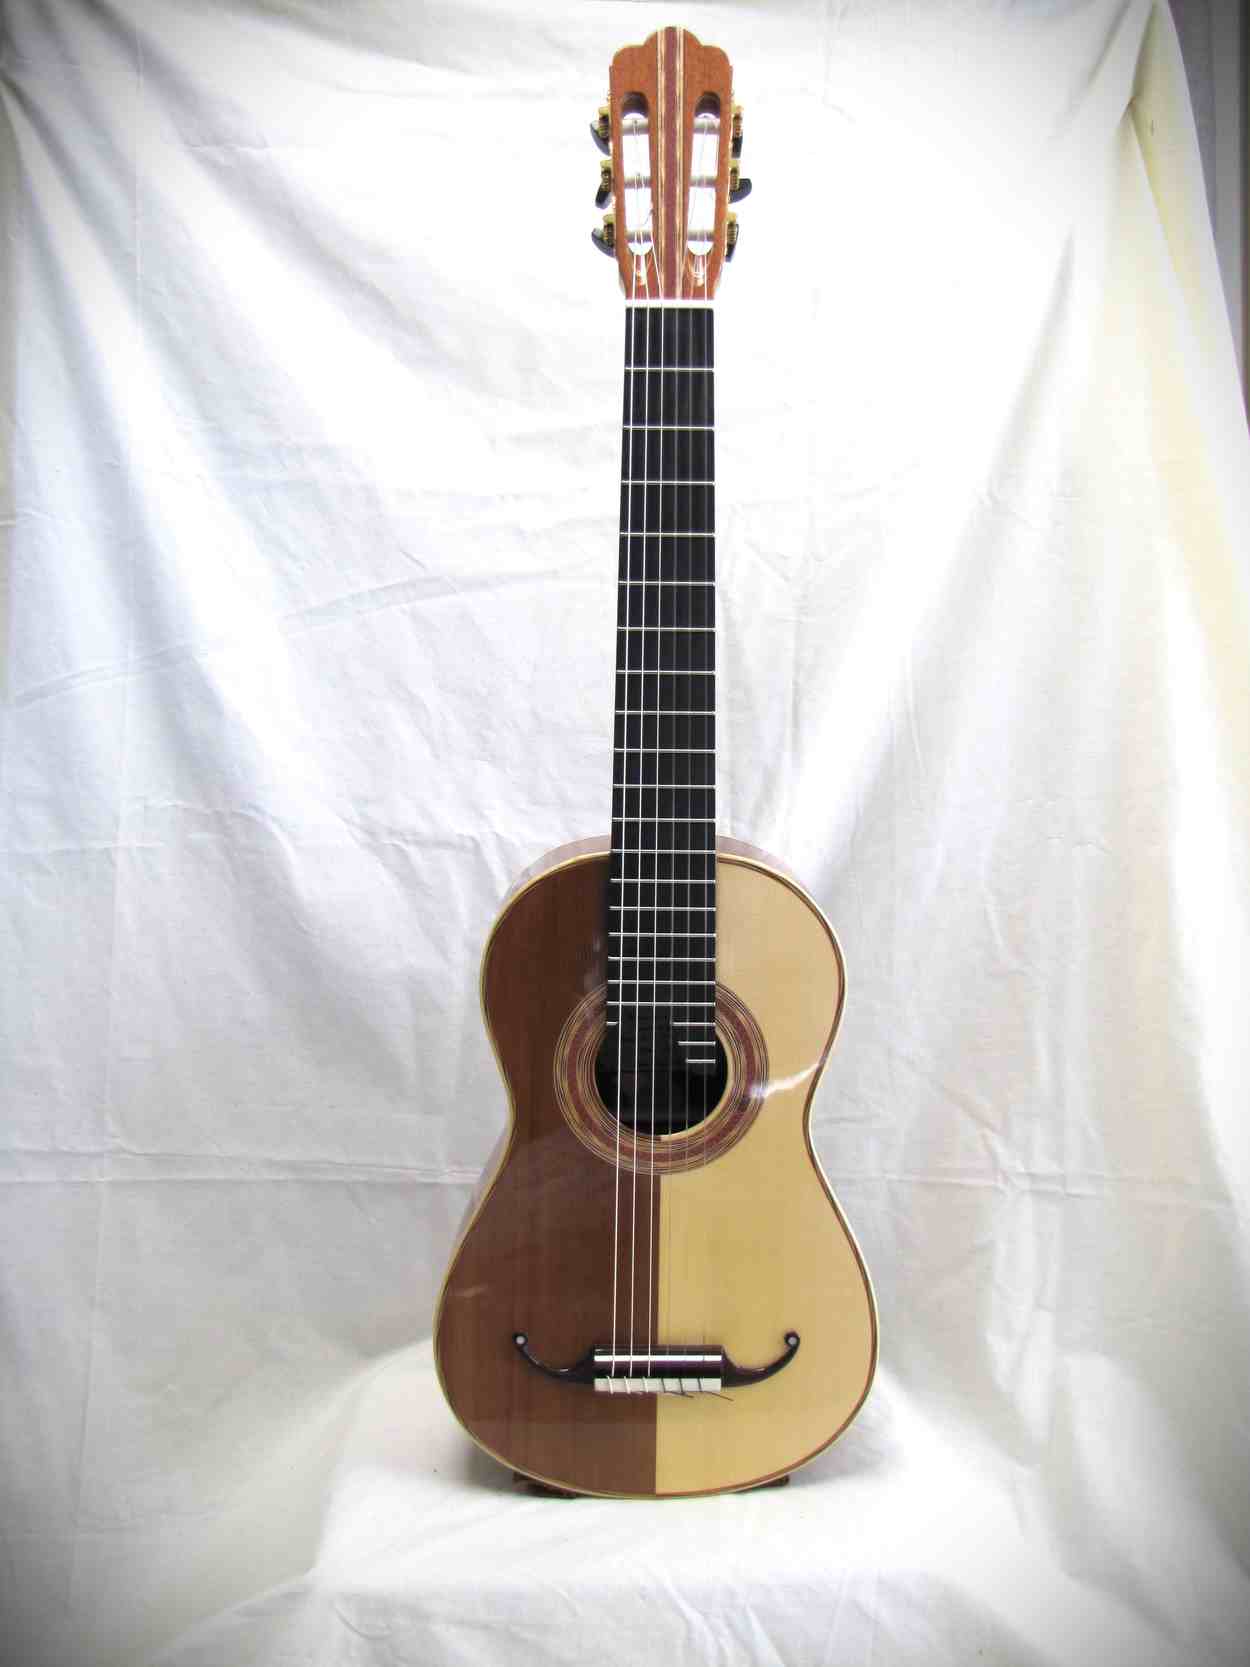 A classical guitar Torres small scale style build with cedar and Spruce and Brazilian Lacewood back and sides